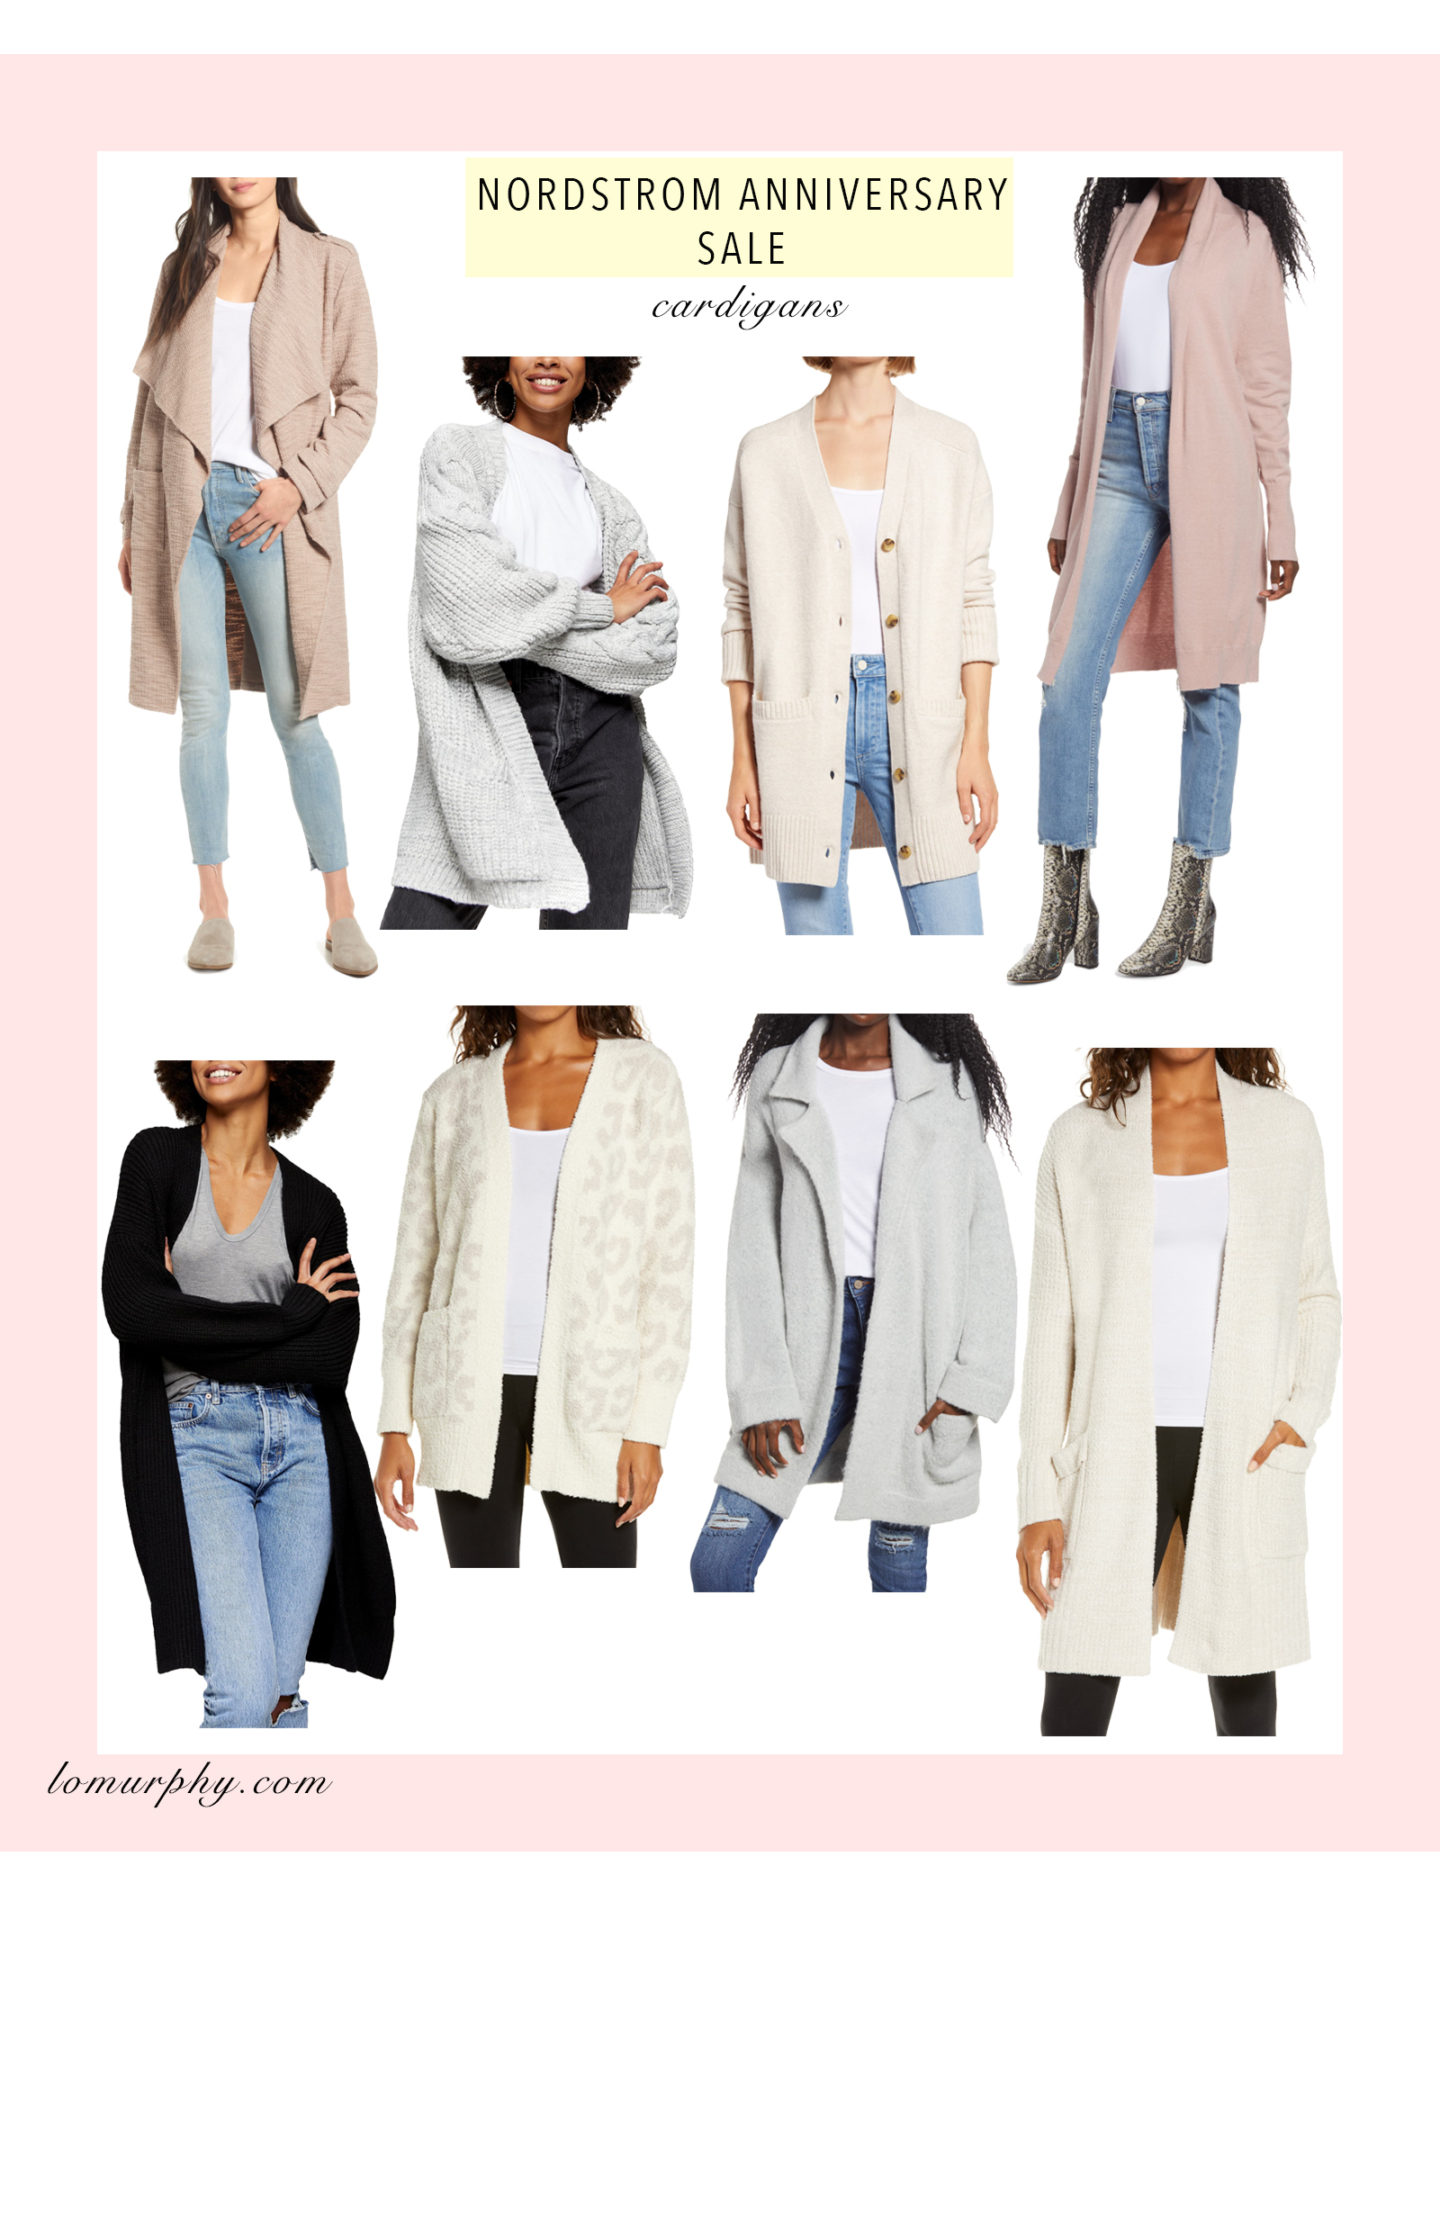 Nordstrom Anniversary Sale: Sweaters & Cardigans